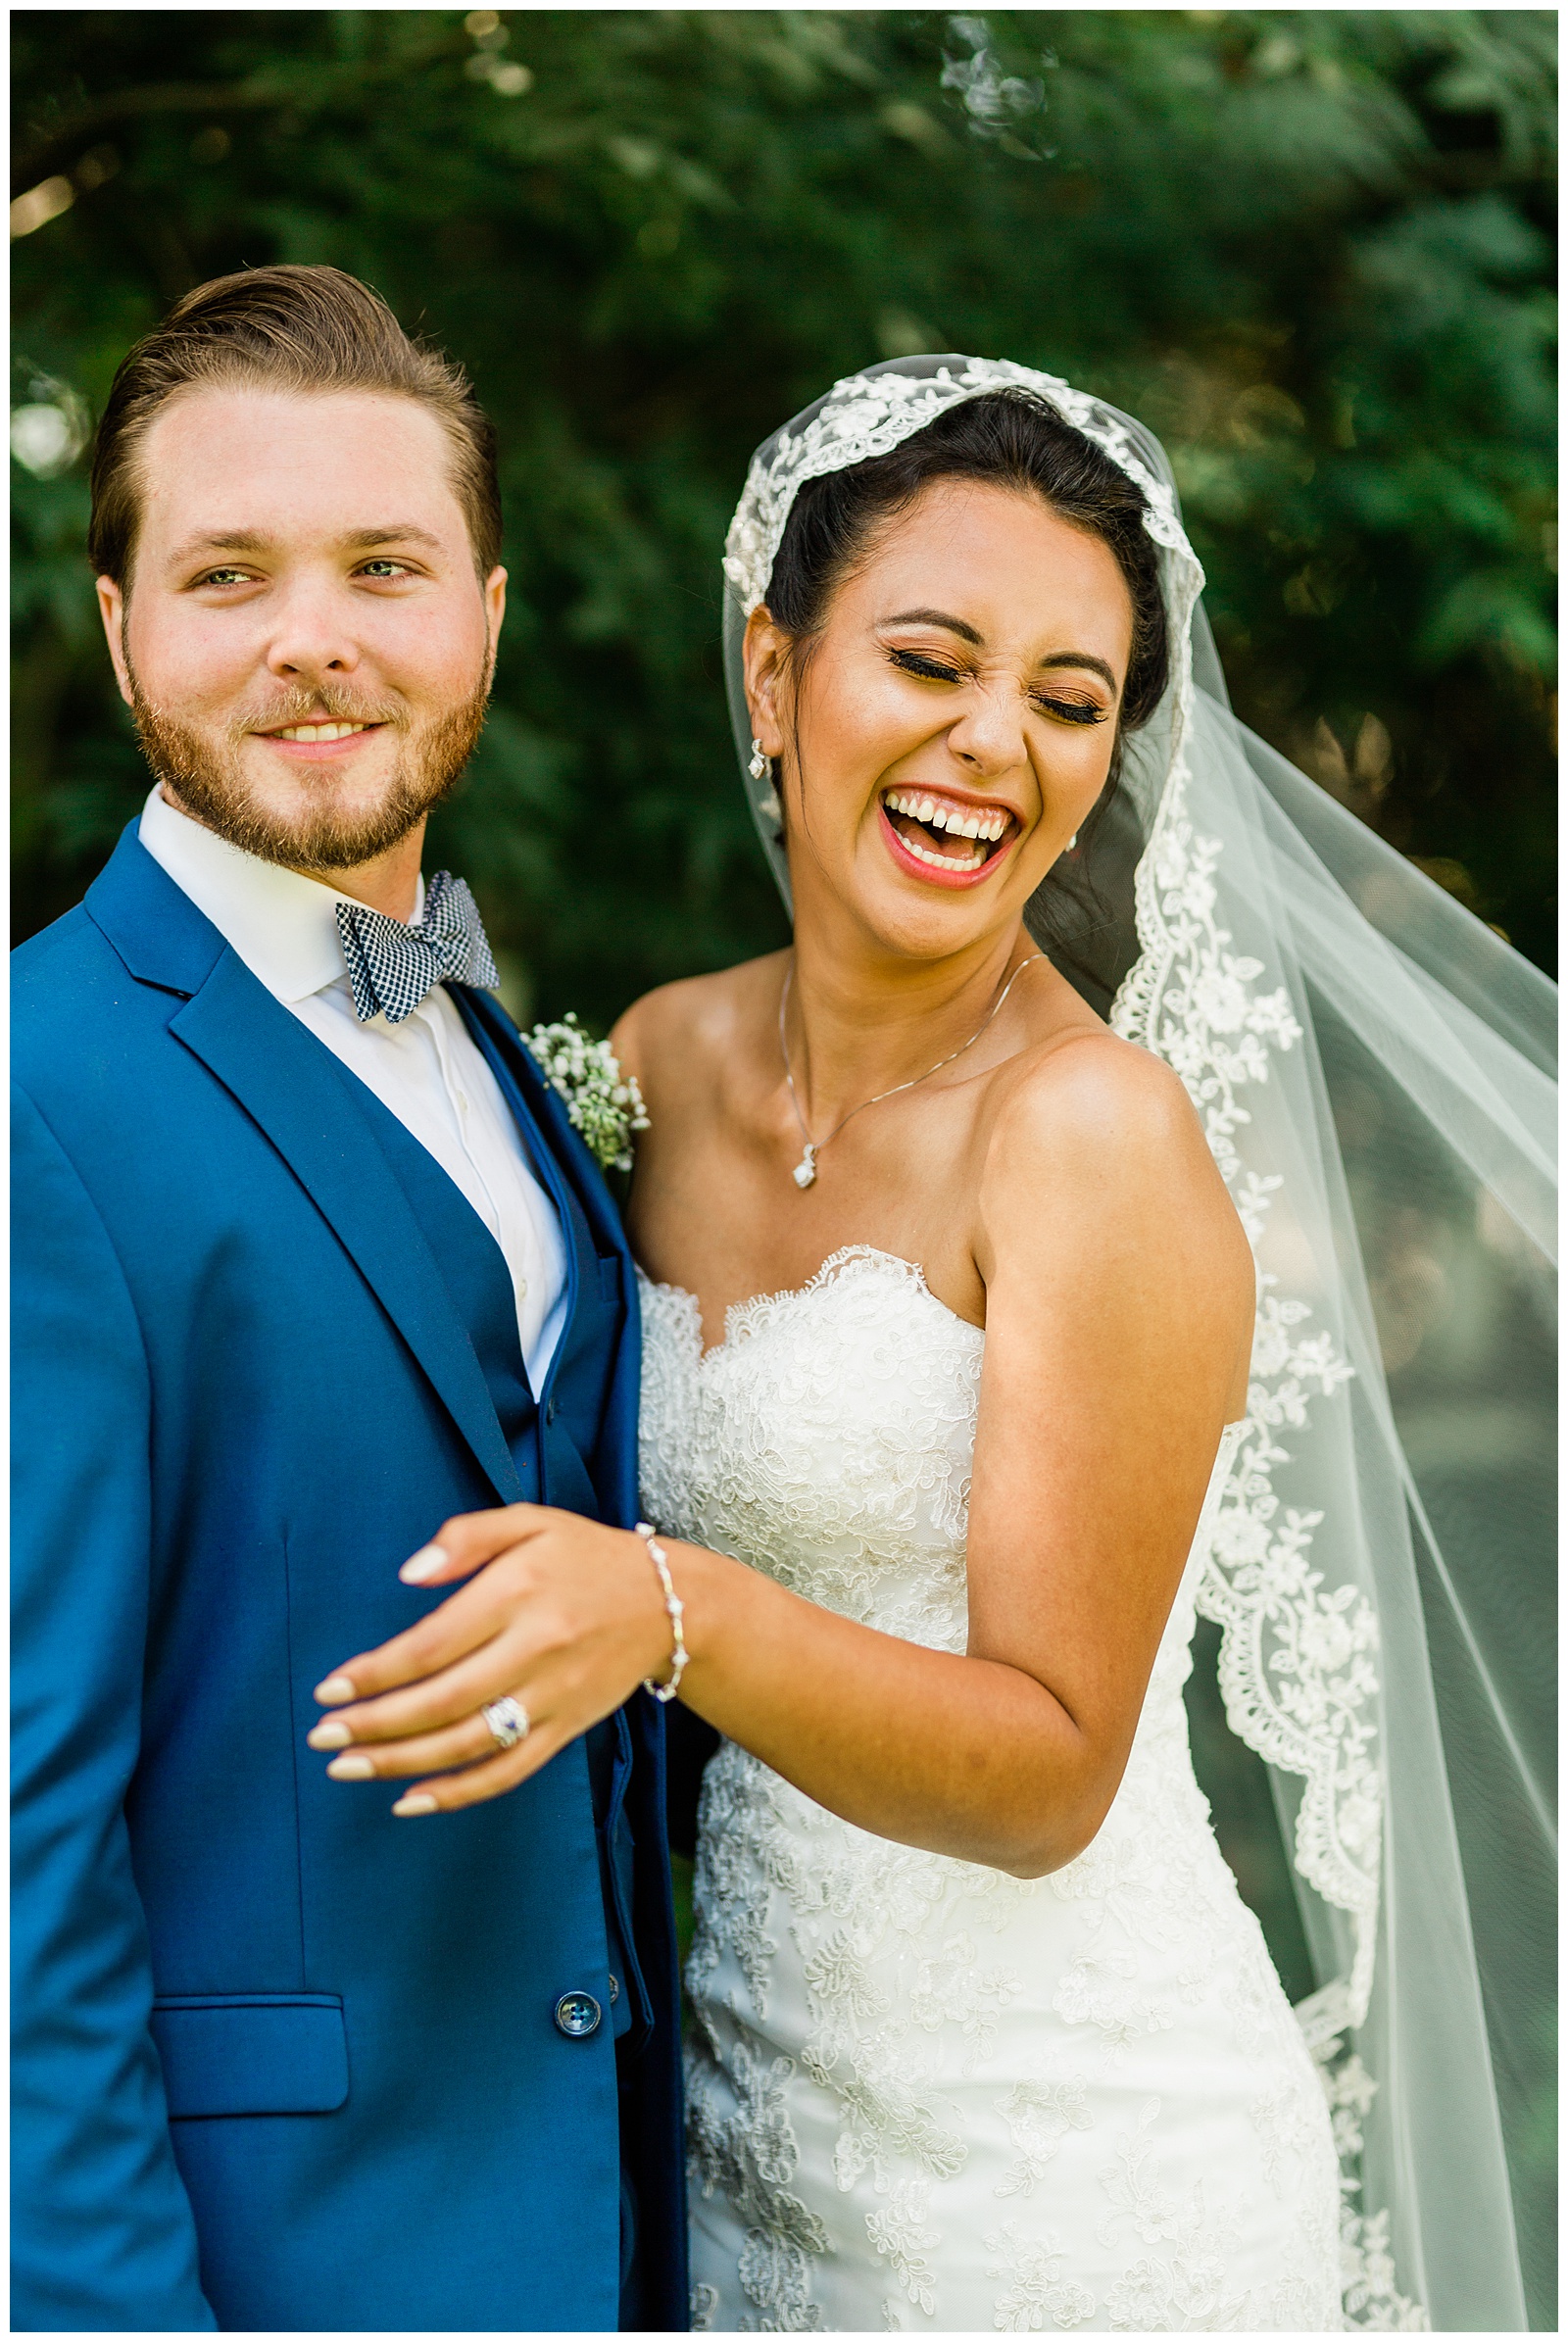 candid photo of a bride and groom laughing during wedding portraits